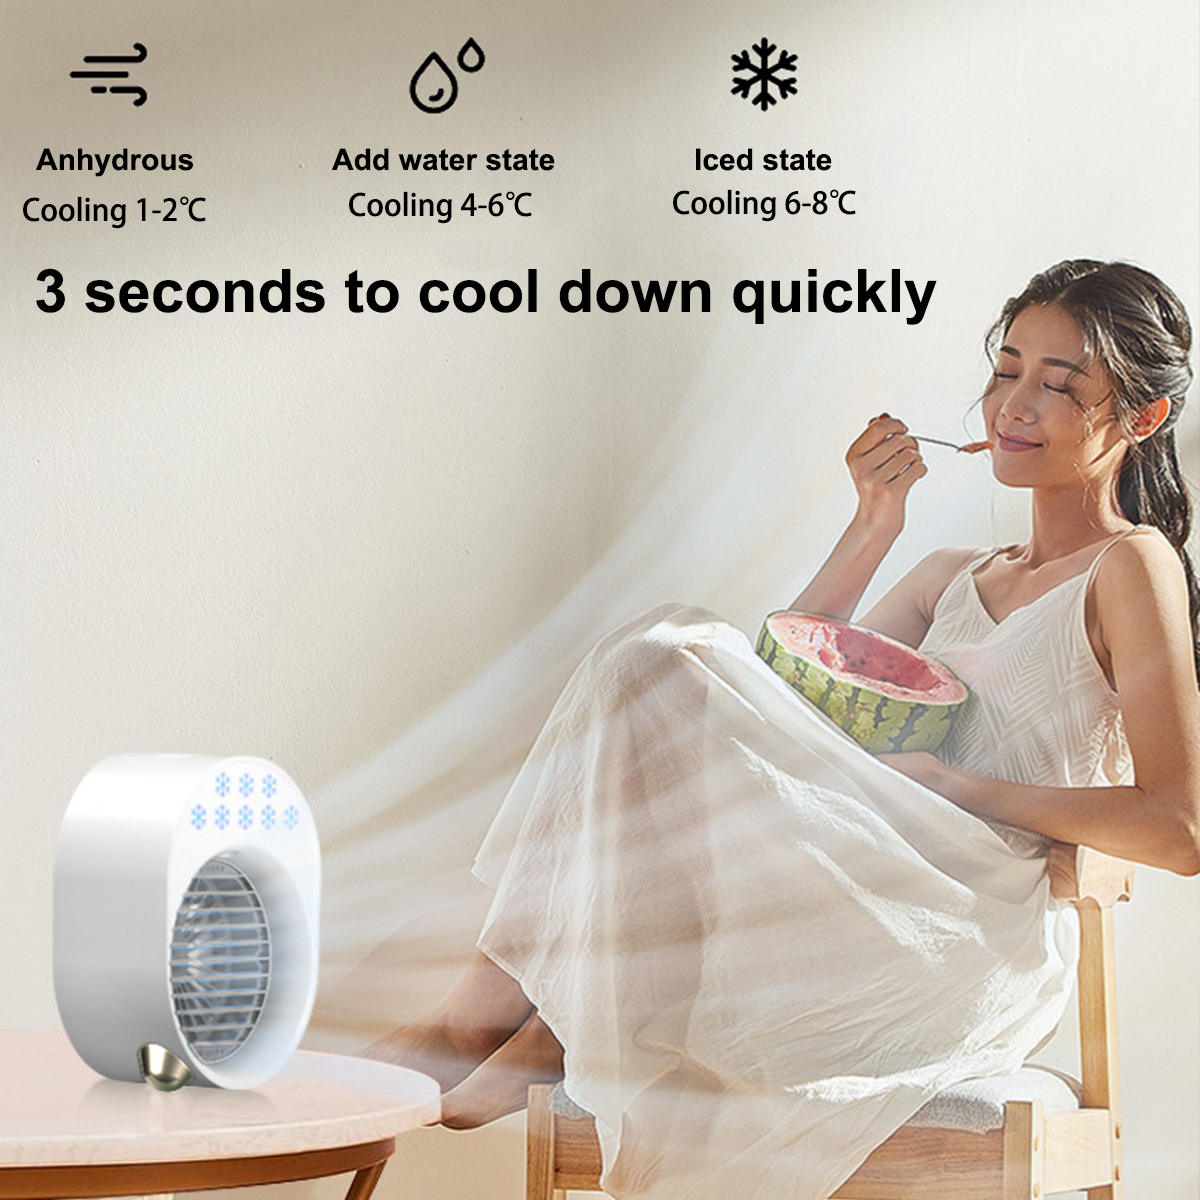 Bakeey-3-Gear-Mini-Water-Cooling-Fan-Spray-Humidification-Portable-Colorful-Night-Light-Air-Cooler-T-1838417-4